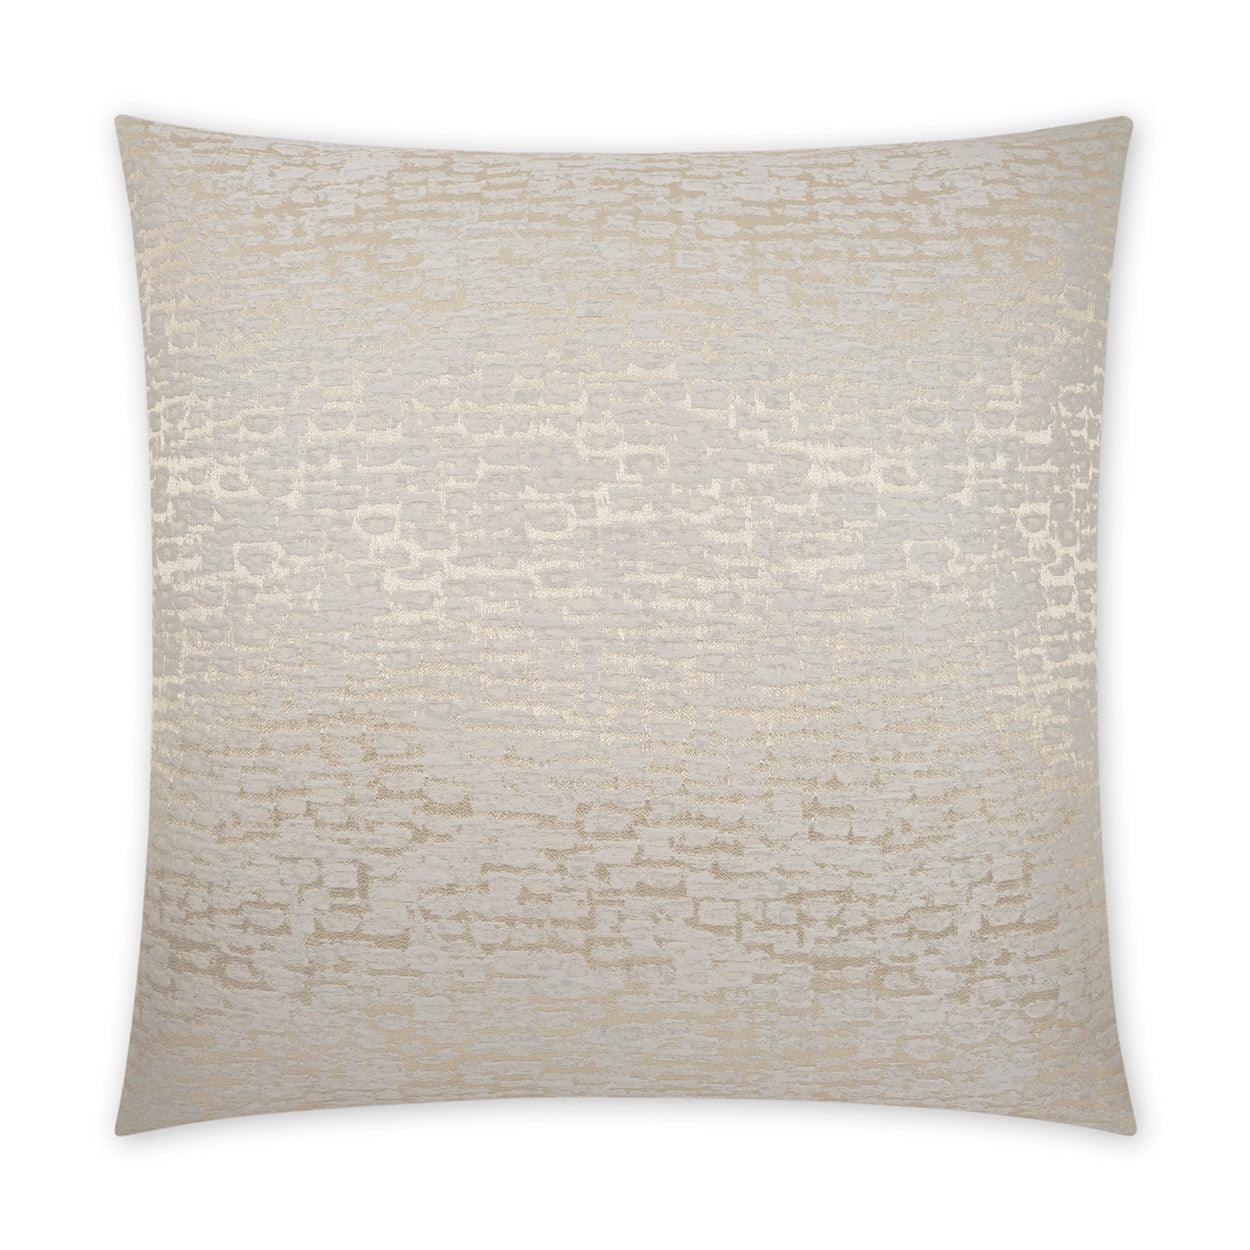 Regine Champagne Glam Gold Large Throw Pillow With Insert - Uptown Sebastian